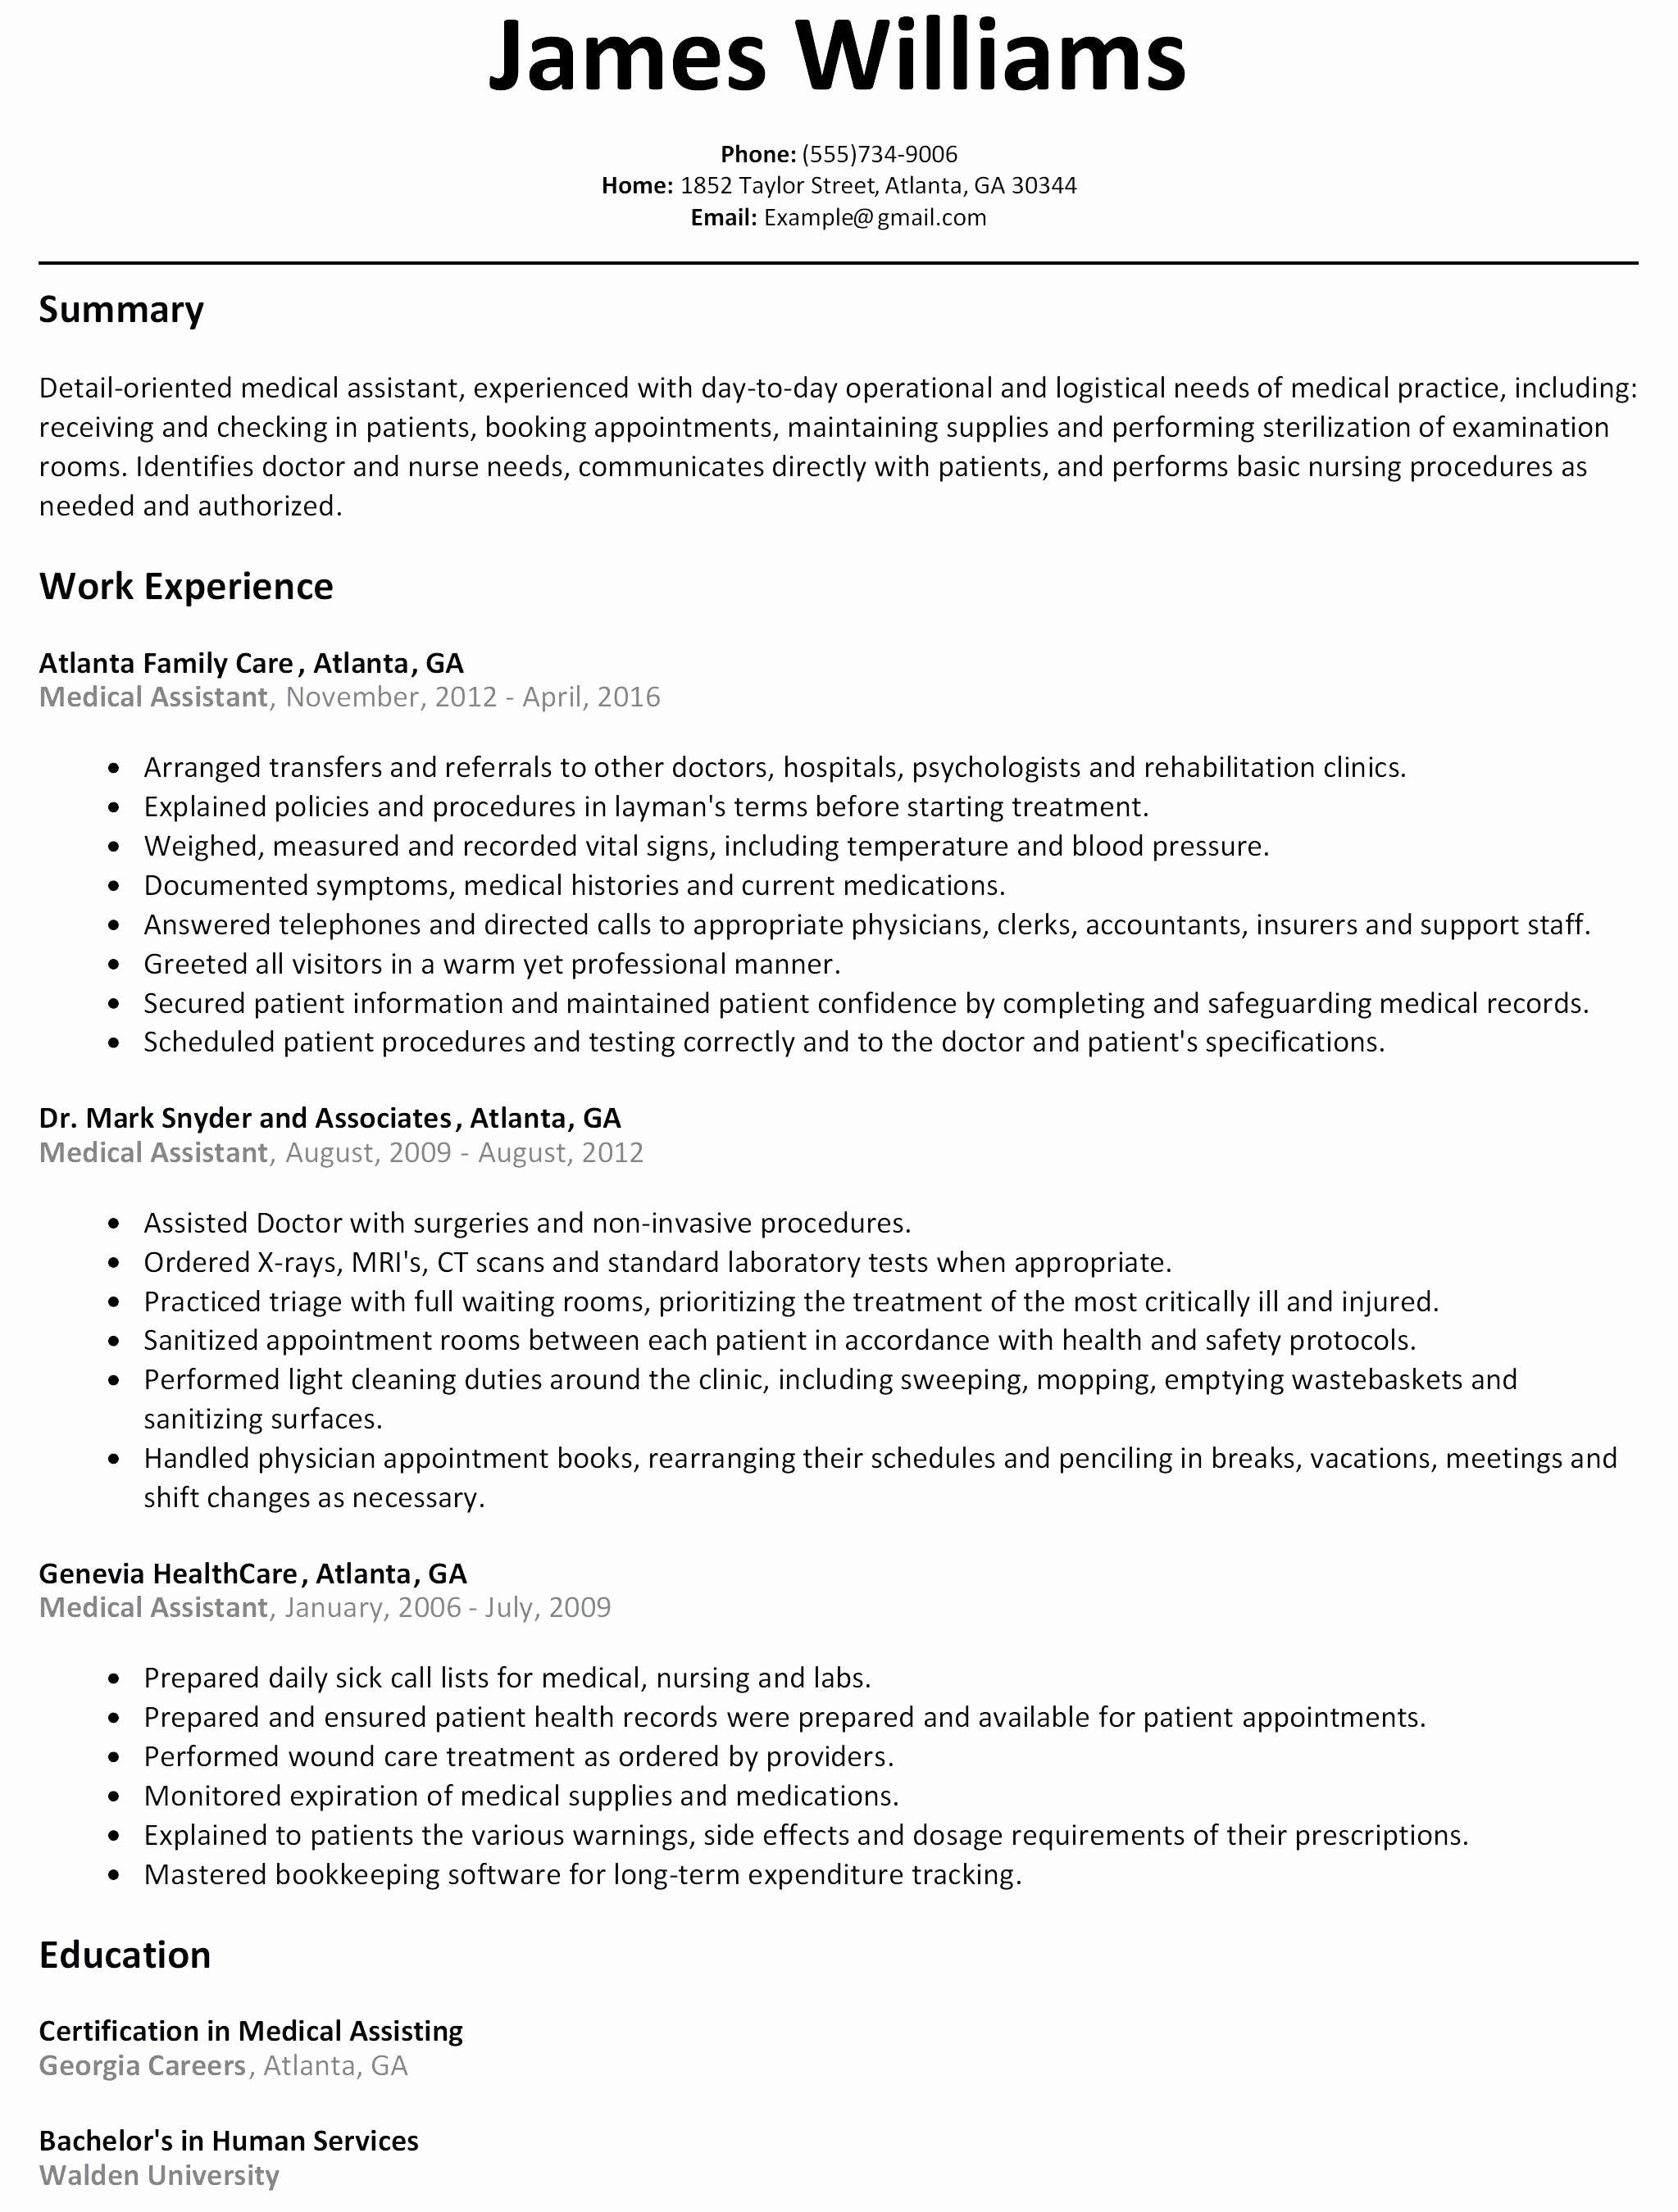 Free Resume Search for Employers Unique Skills to Have